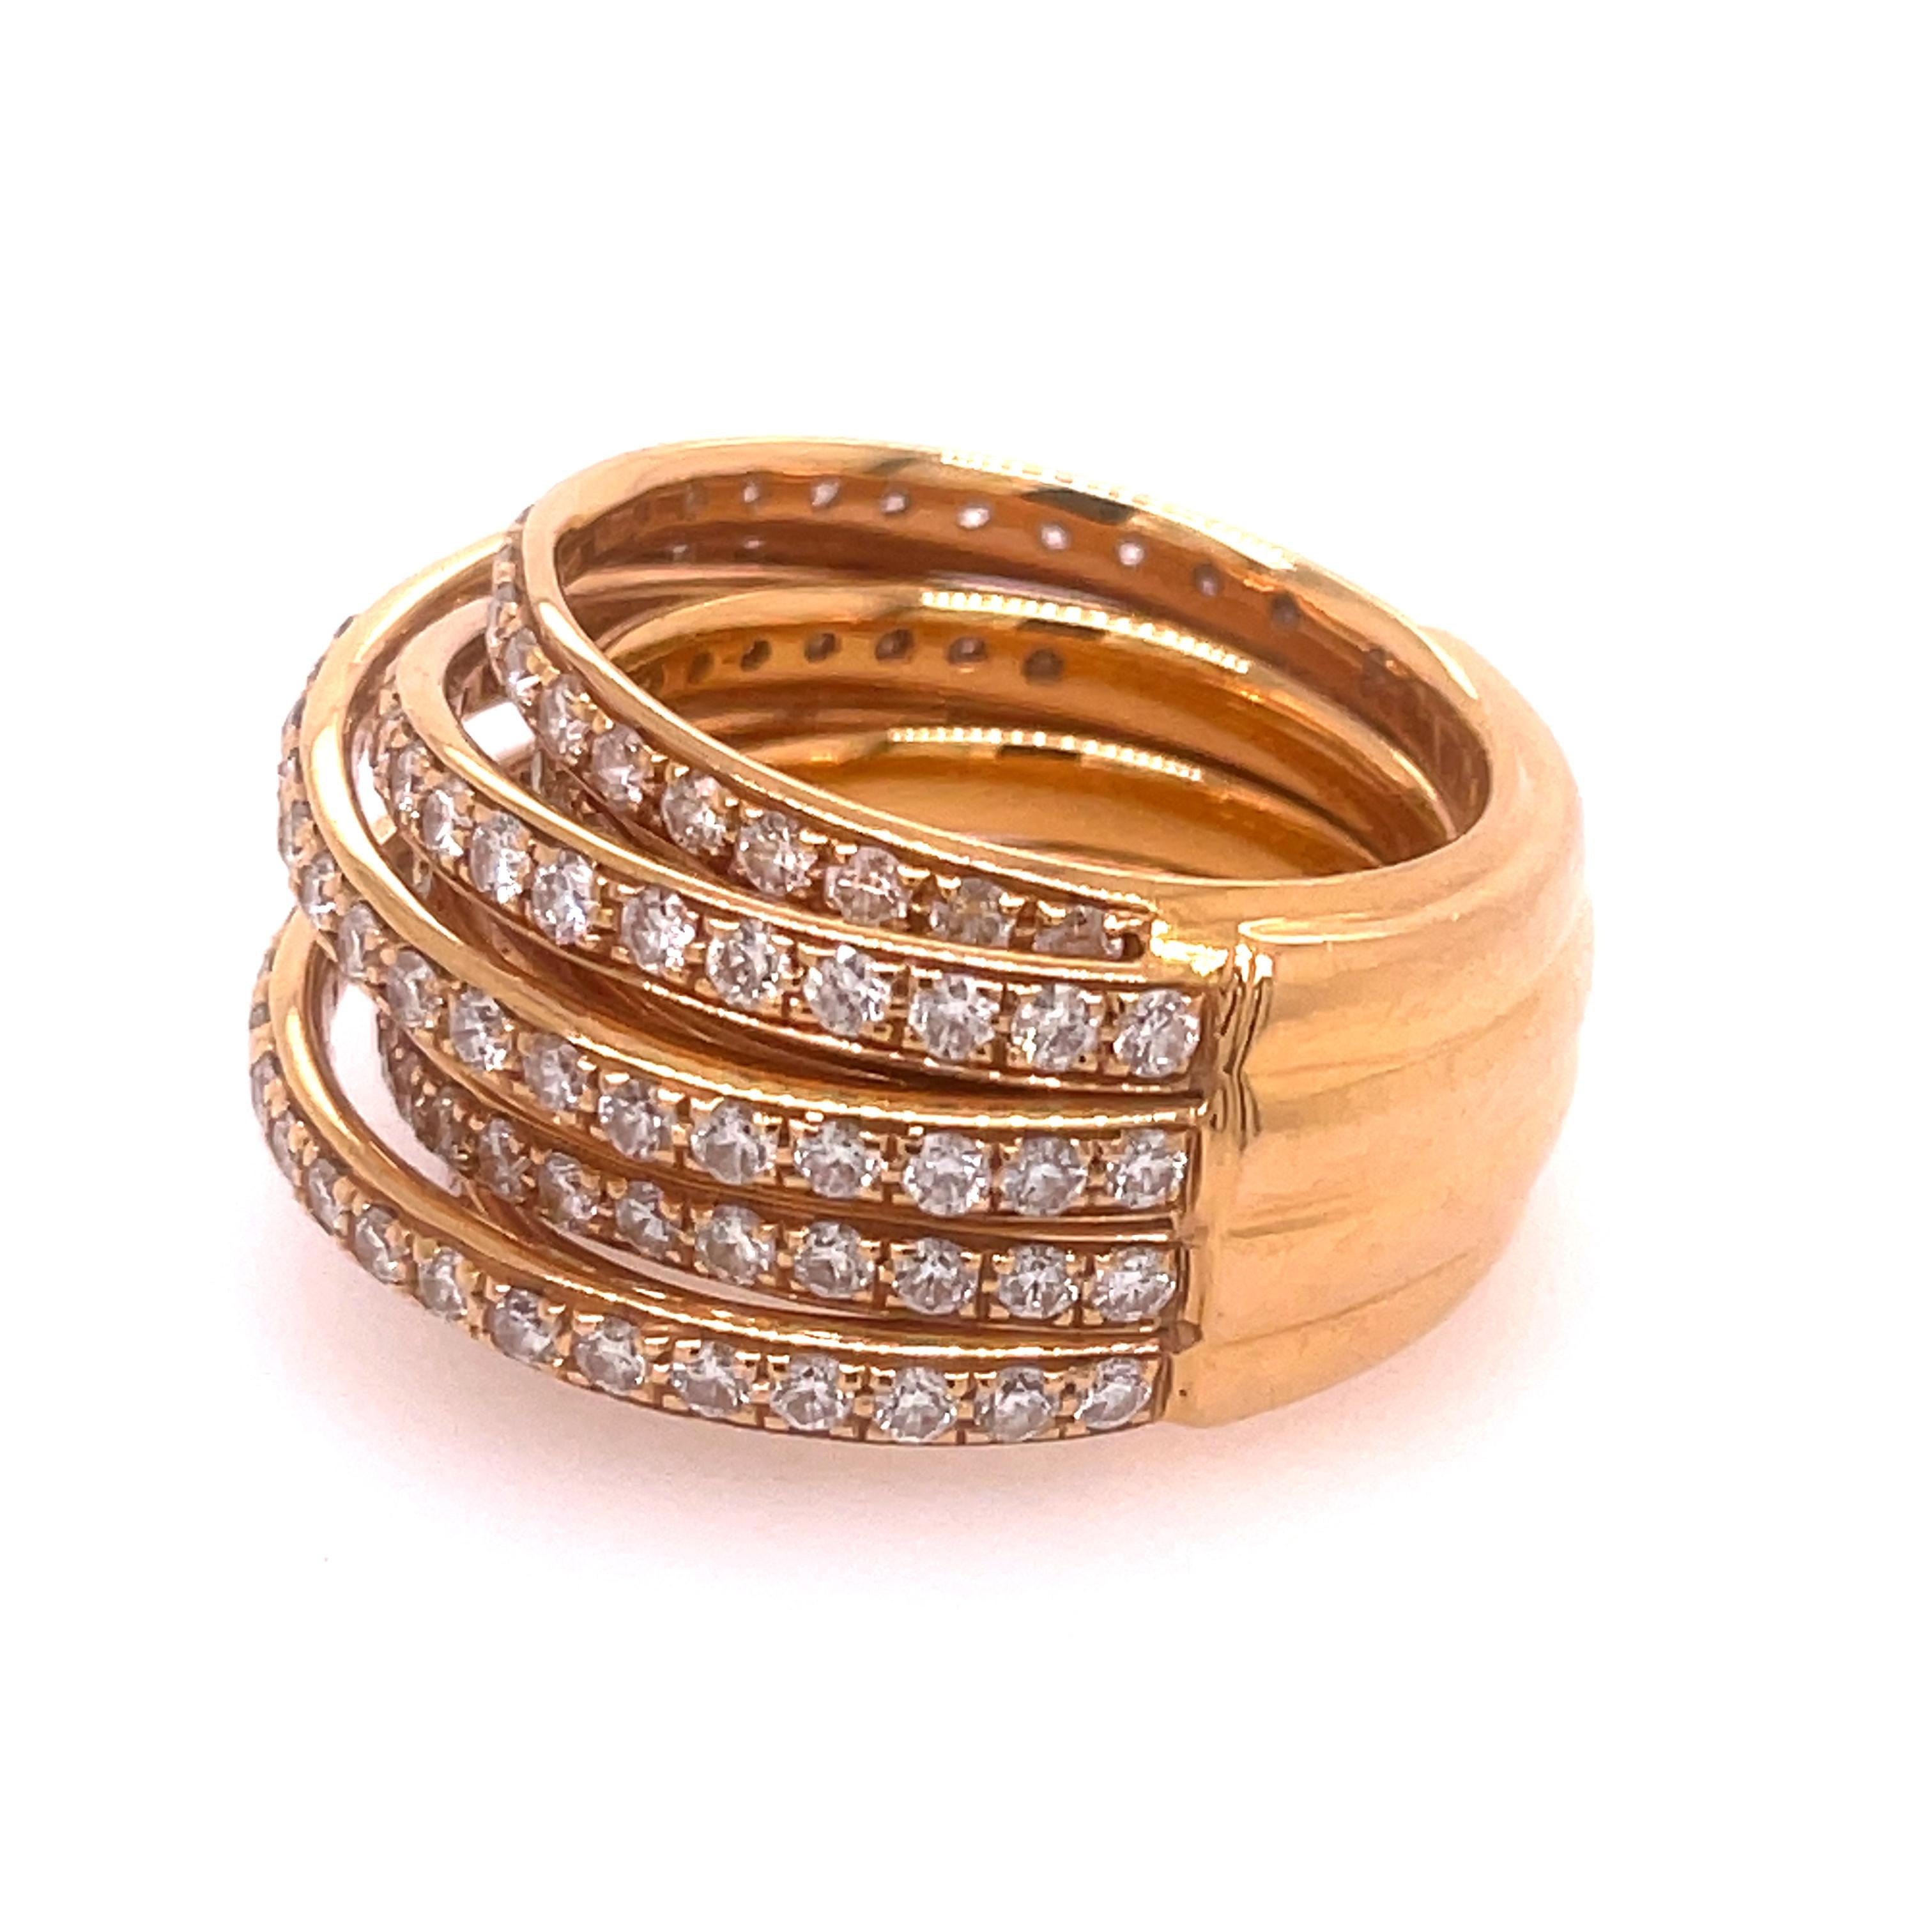 De Grisogono 18K Rose Gold Allegra Diamond Ring. Finger size 55 (7.5). Stamped DE GRISOGONO 55 AU 750. Ring can be sized up to one size up or down. 
